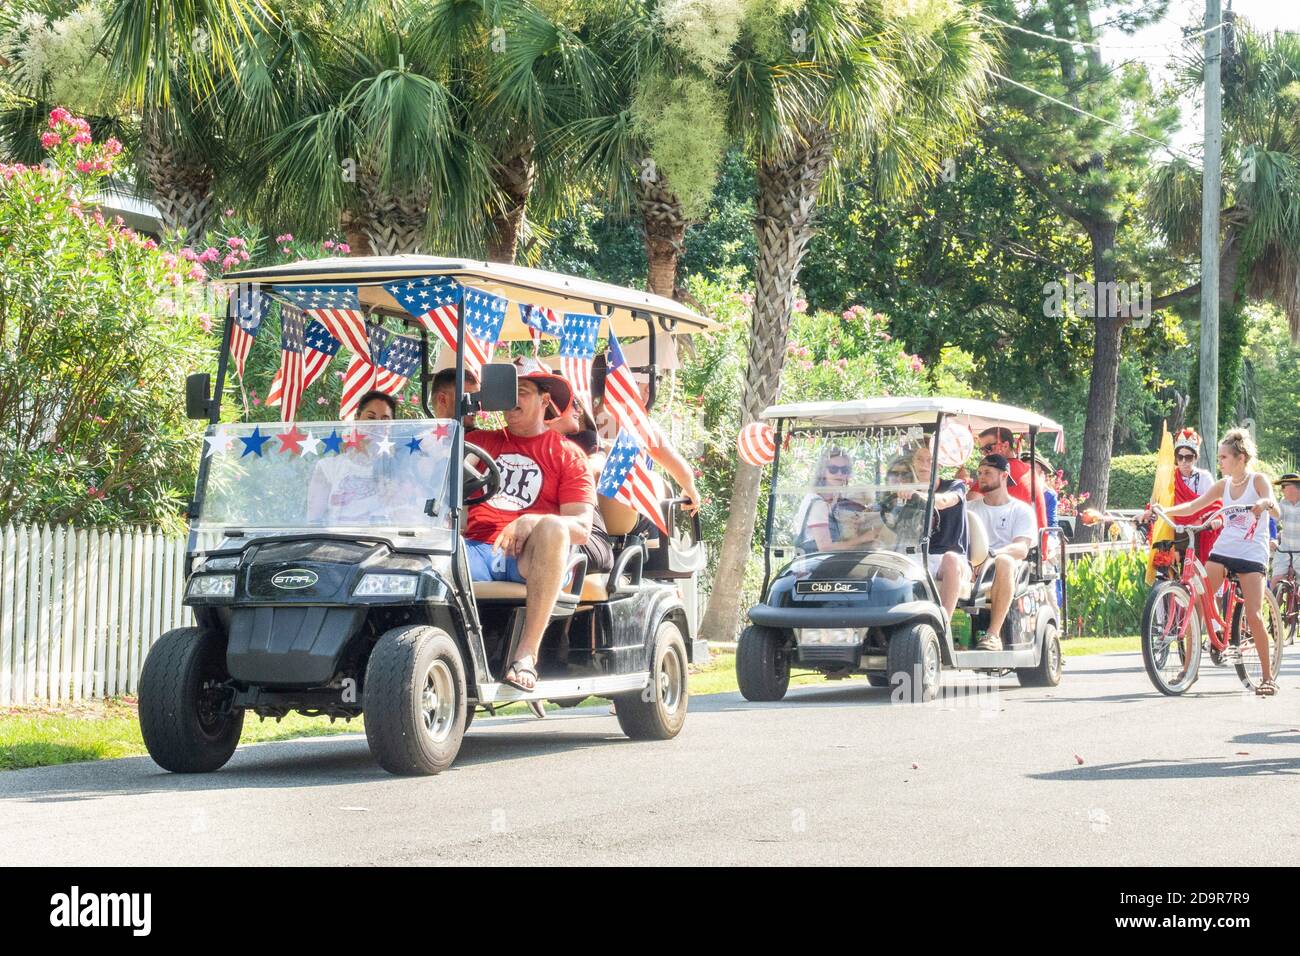 Decorated golf carts ride down the road during the annual Independence Day parade July 4, 2019 in Sullivan's Island, South Carolina. The tiny affluent Sea Island beach community across from Charleston holds an outsized golf cart parade featuring more than 75 decorated carts. Stock Photo